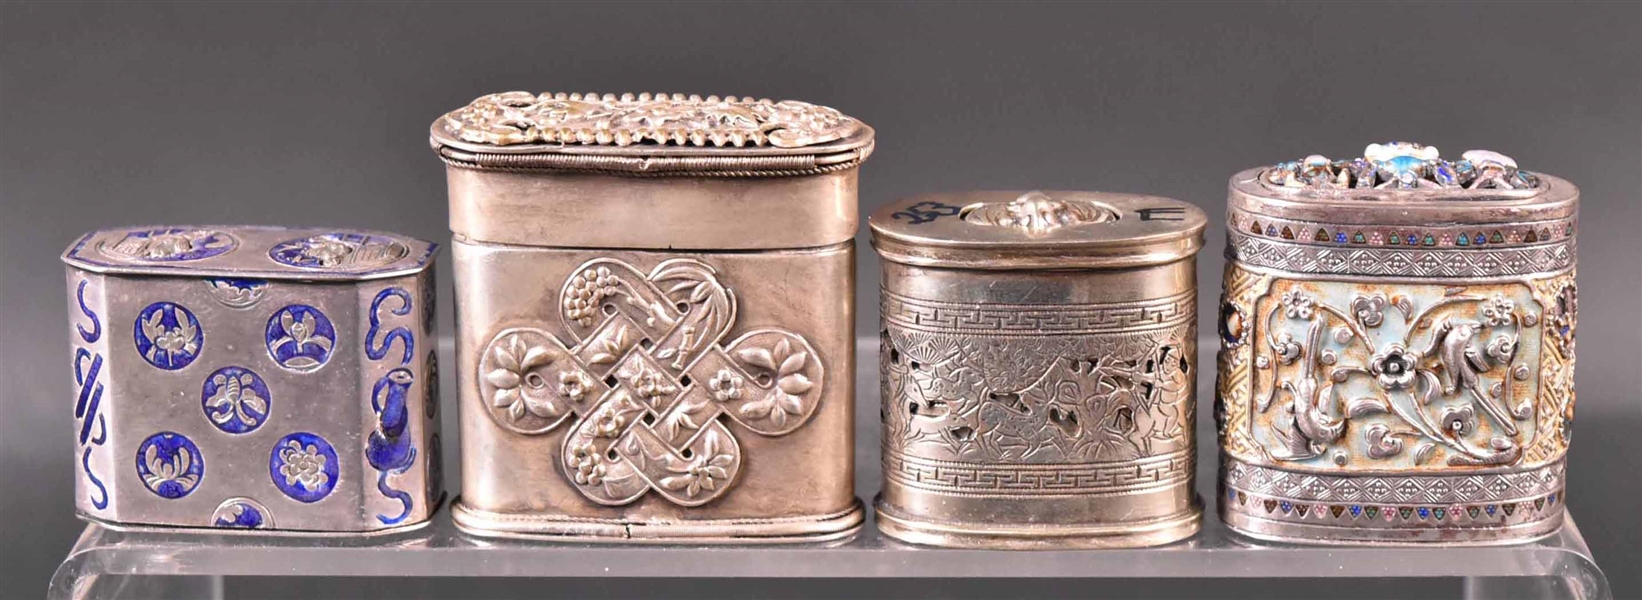 Four Chinese Export Silver Opium Boxes